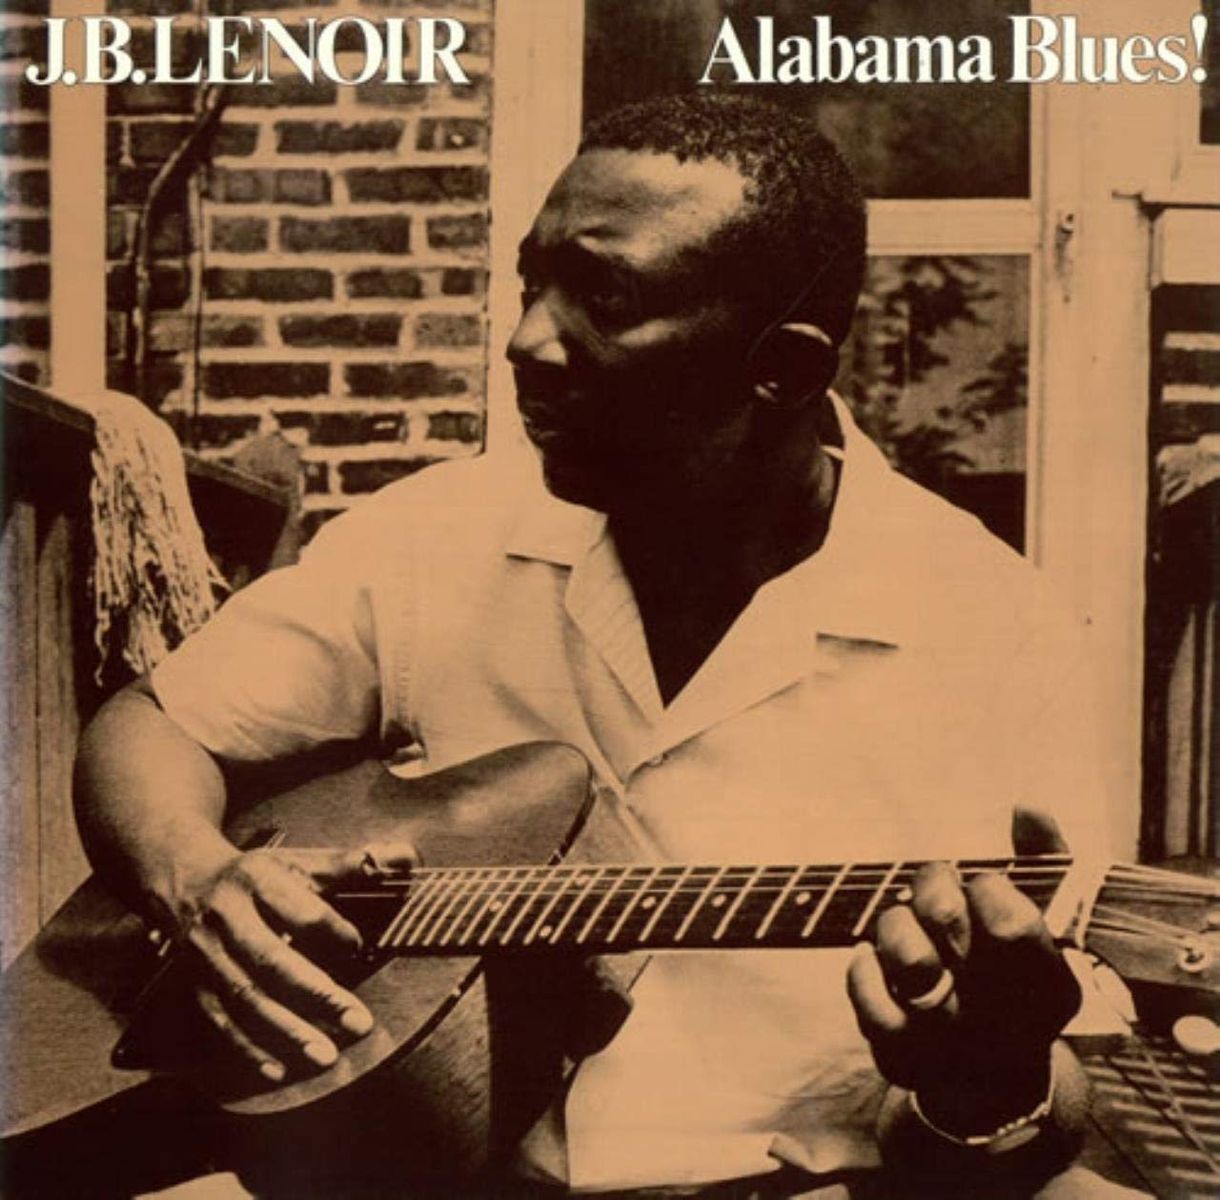 <p>Although this song is called “Alabama Blues,” guitarist and singer-songwriter J.B. Lenoir was actually born in another southern state—Mississippi—in 1929. At that time, <a href="https://mississippiencyclopedia.org/entries/segregation/">racial segregation touched every aspect of life in the state</a>. Black and white people were kept apart in hospitals, schools, stores, restaurants, and libraries, as well as on public transportation and in public facilities. Laws were enacted to prevent Black people from voting. Mississippi was the southern state that spent the least on education for Black children. Violence against Black people was common, and white perpetrators often faced no punishment or legal consequences for their actions. </p><p>In 1949, Lenoir moved to Chicago and had a successful musical career there, but the things he had witnessed and experienced in his early life continued to haunt him: “I never will go back to Alabama, that is not the place for me / You know they killed my sister and my brother / And the whole world let them peoples go down there free.”</p><p><a href="https://www.youtube.com/watch?v=TtzIy1YUVXU">Listen to the song here</a></p>